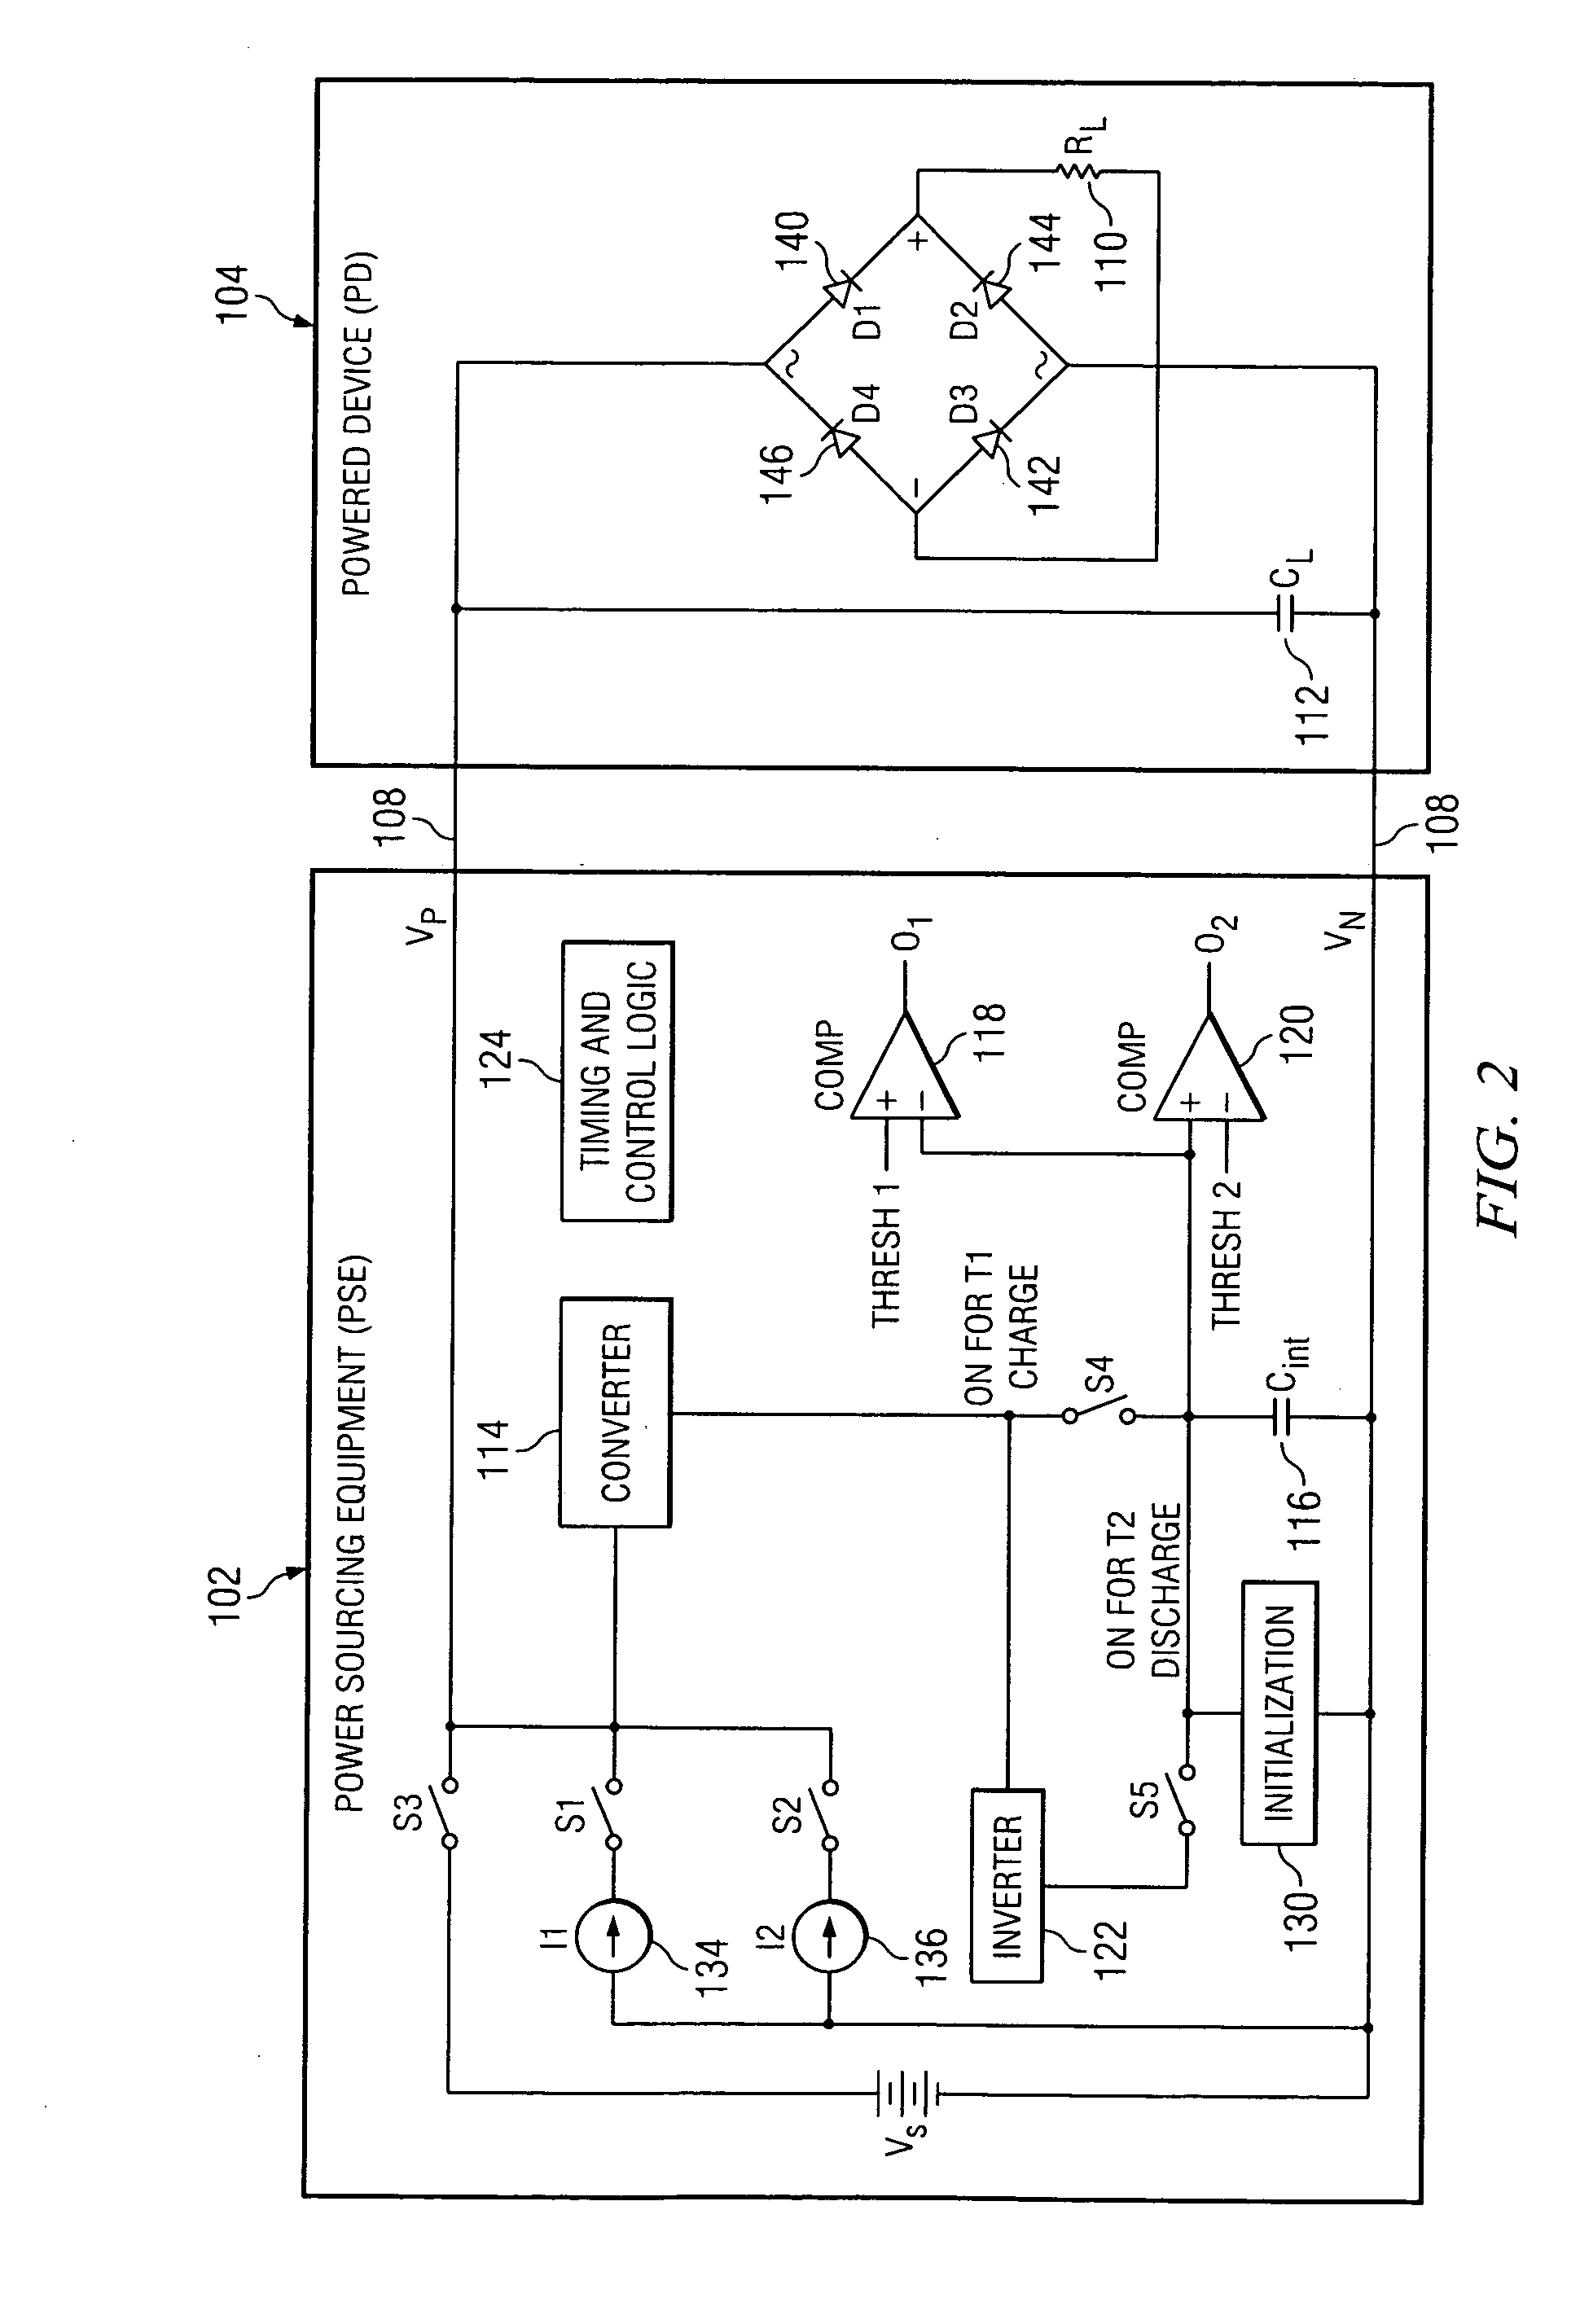 System and method for characterizing a load at the end of a cable